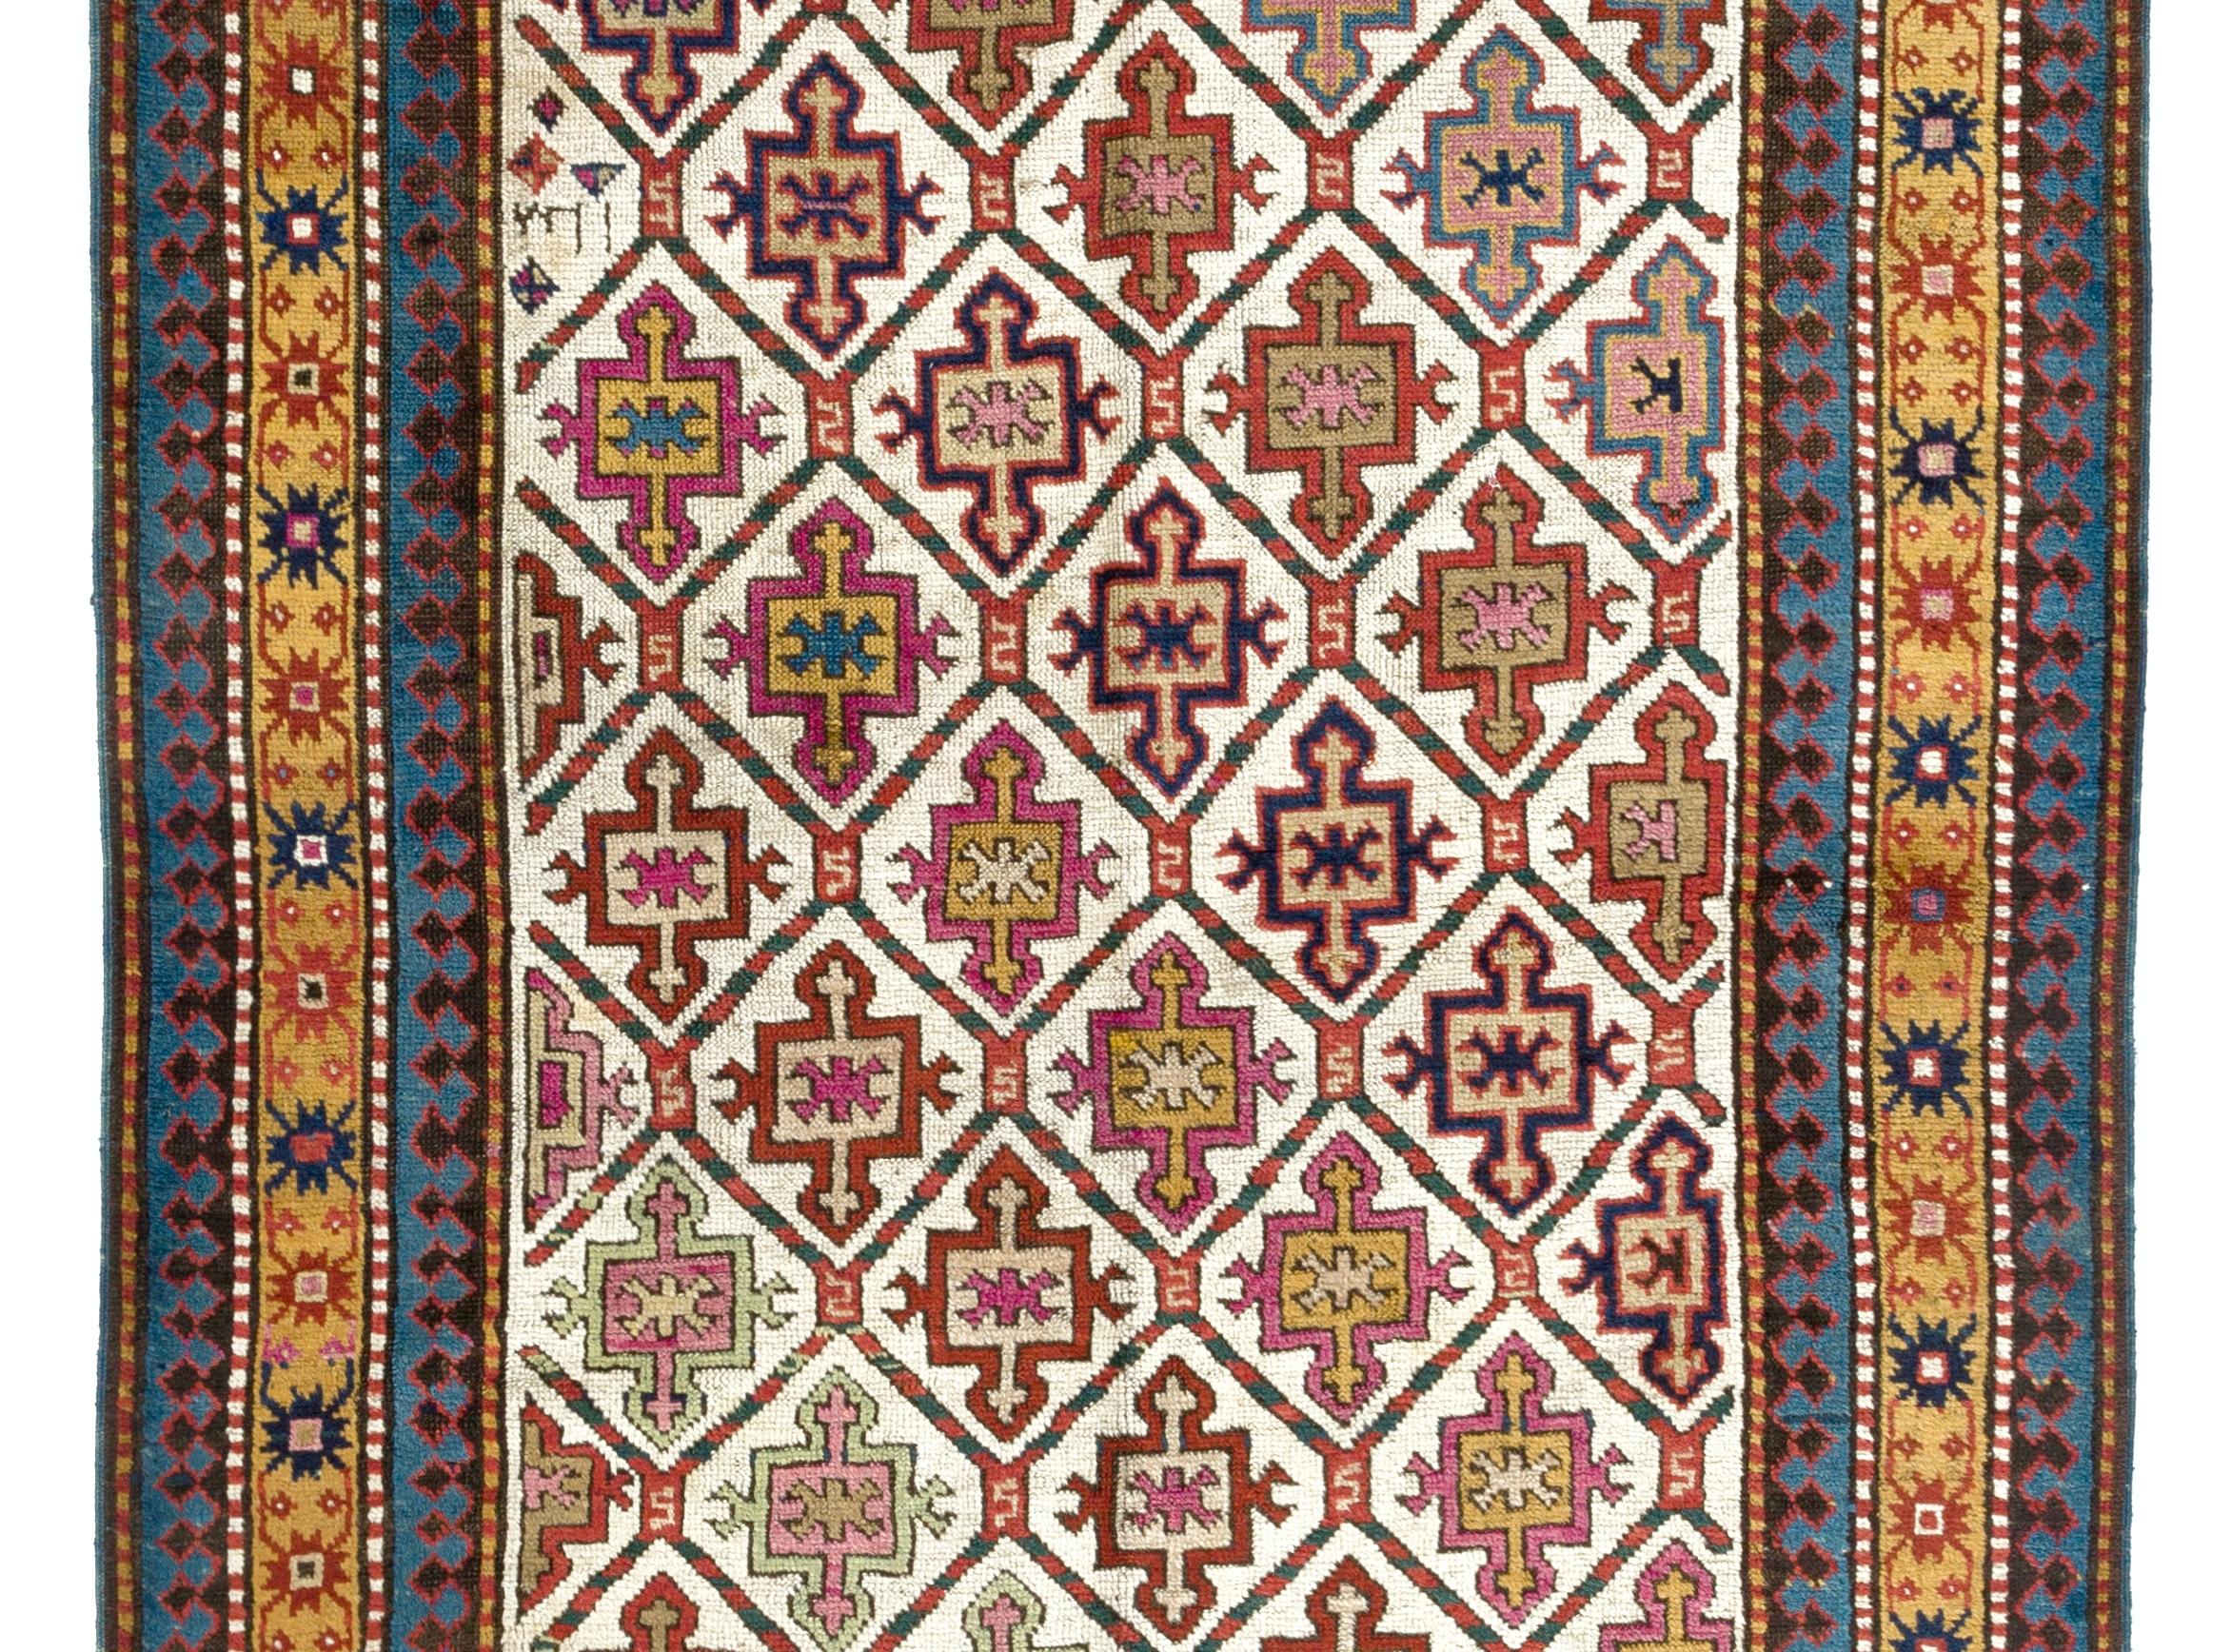 Hand-Knotted Rare Antique Caucasian Kazak Rug from Karabagh, Dated, 1812 For Sale